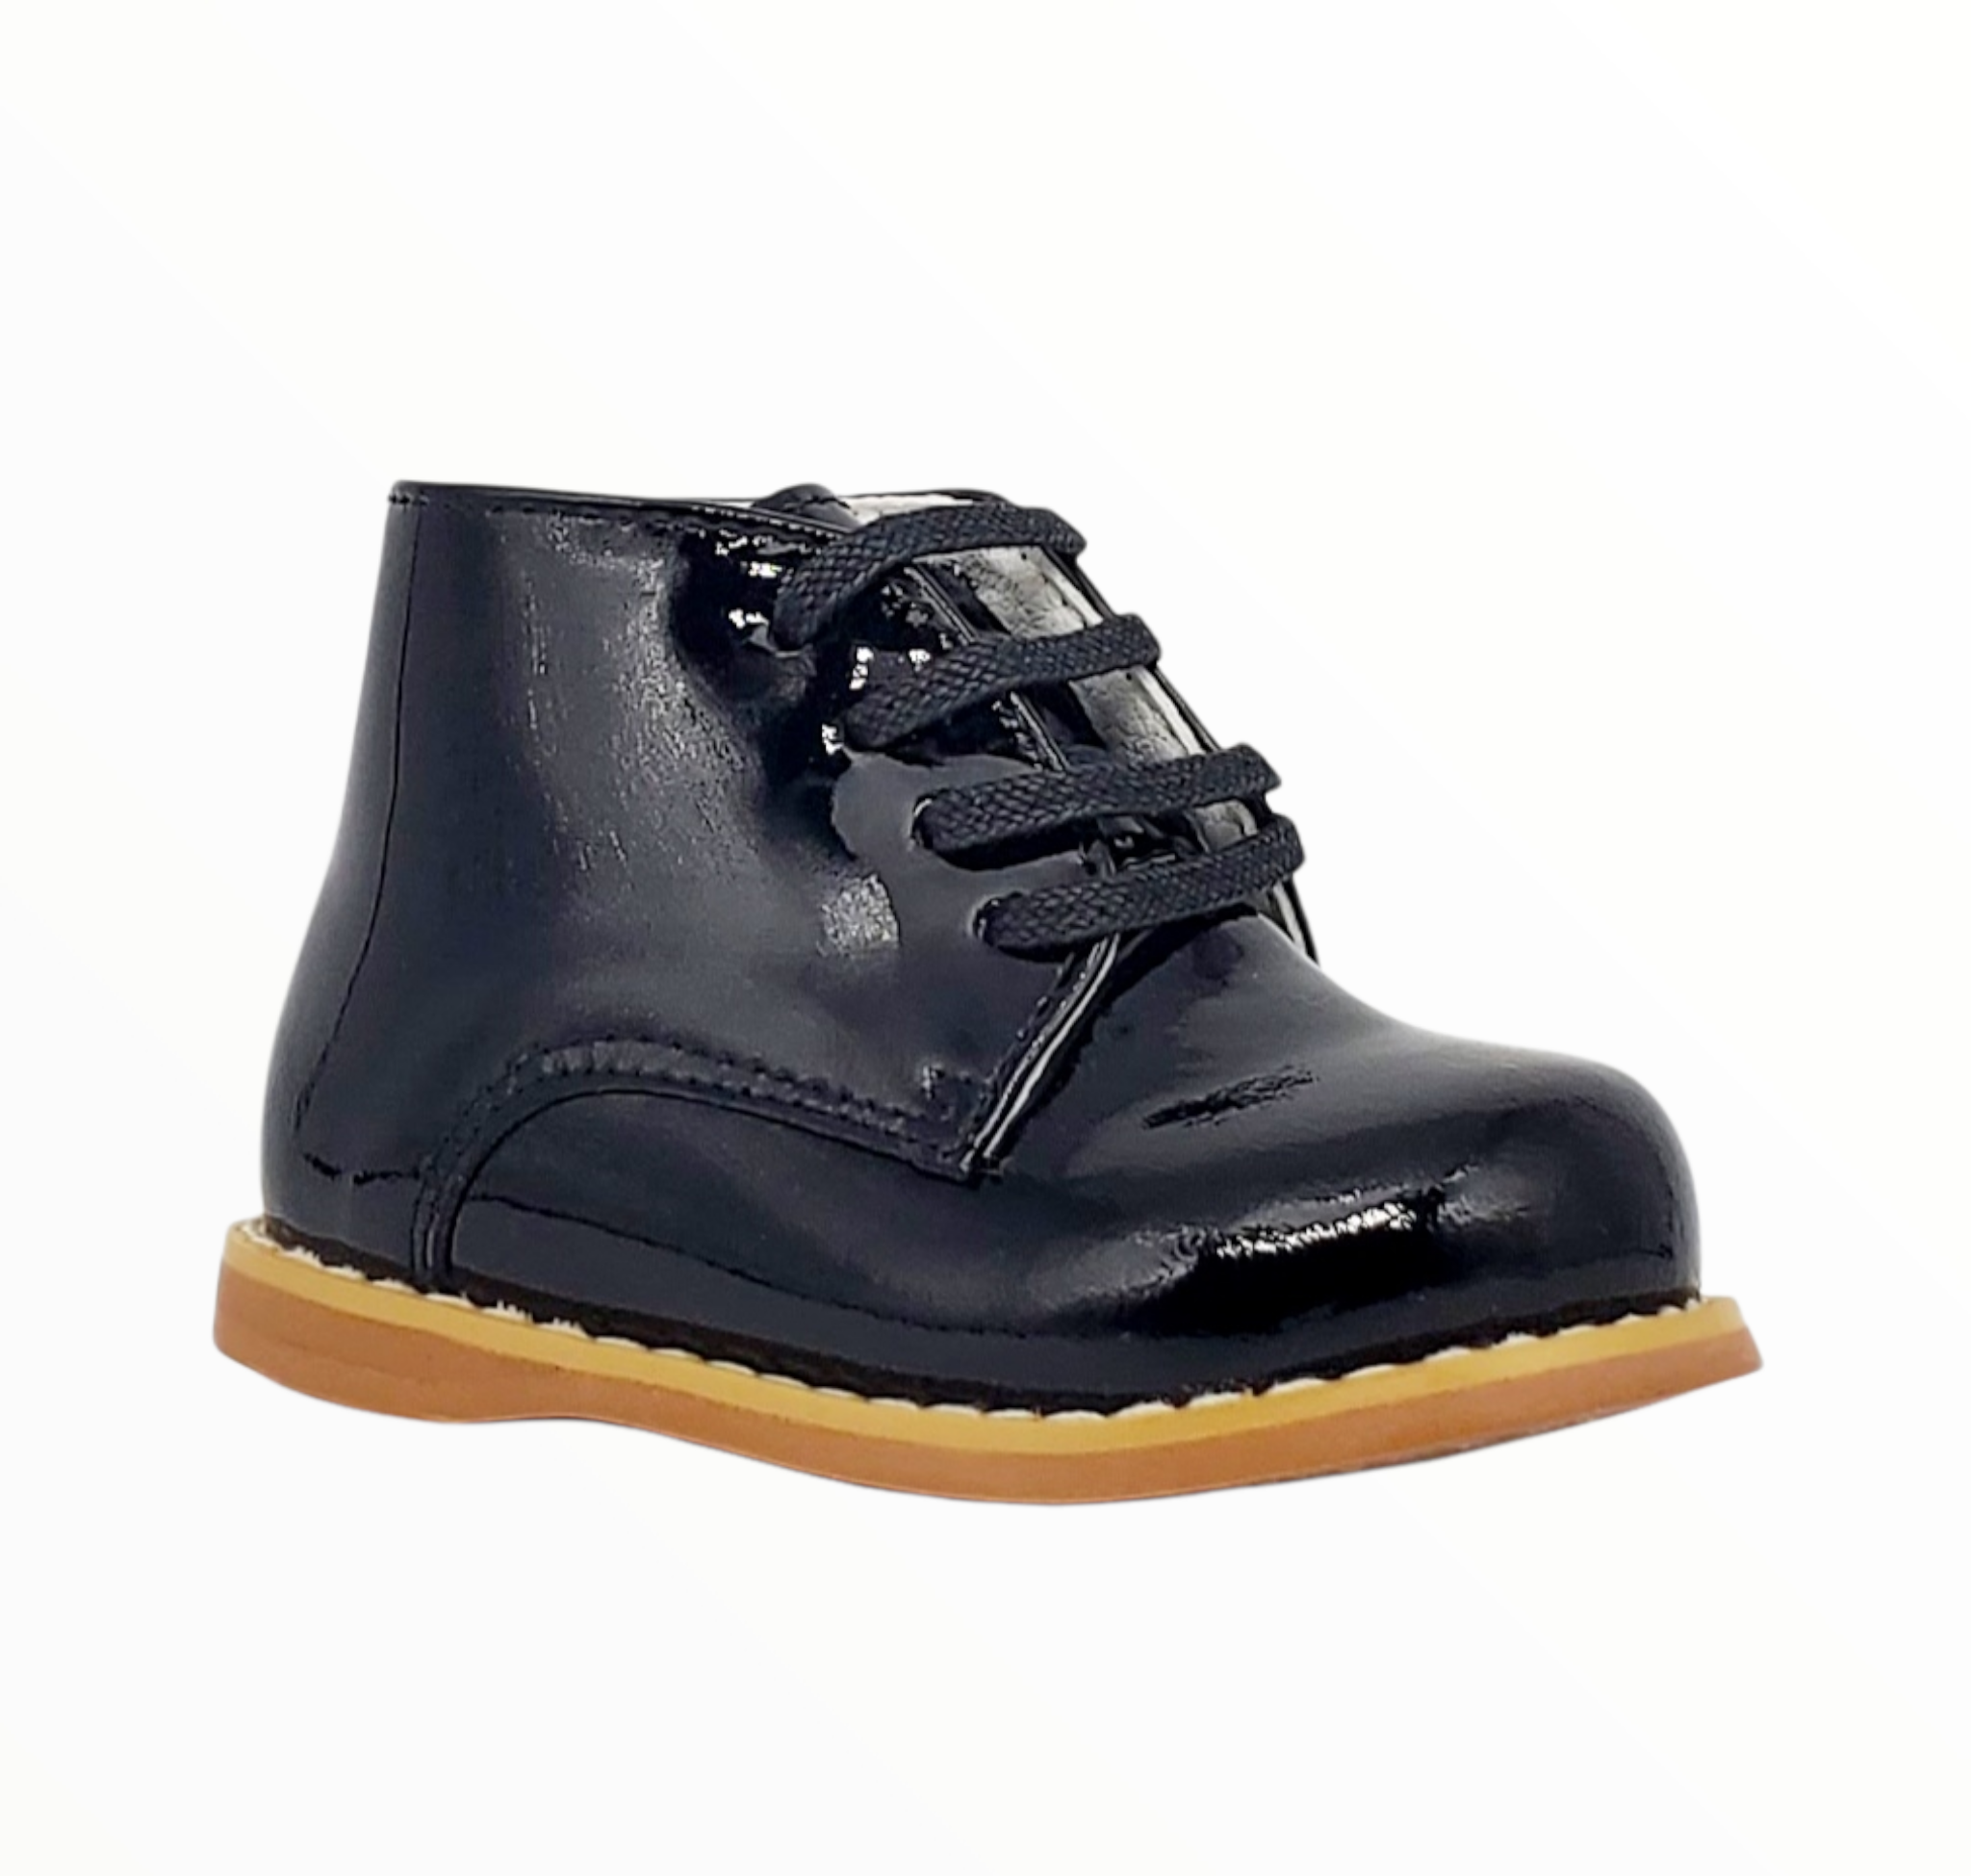 Classic Walkers - Black Patent - Tippy Tot Shoes